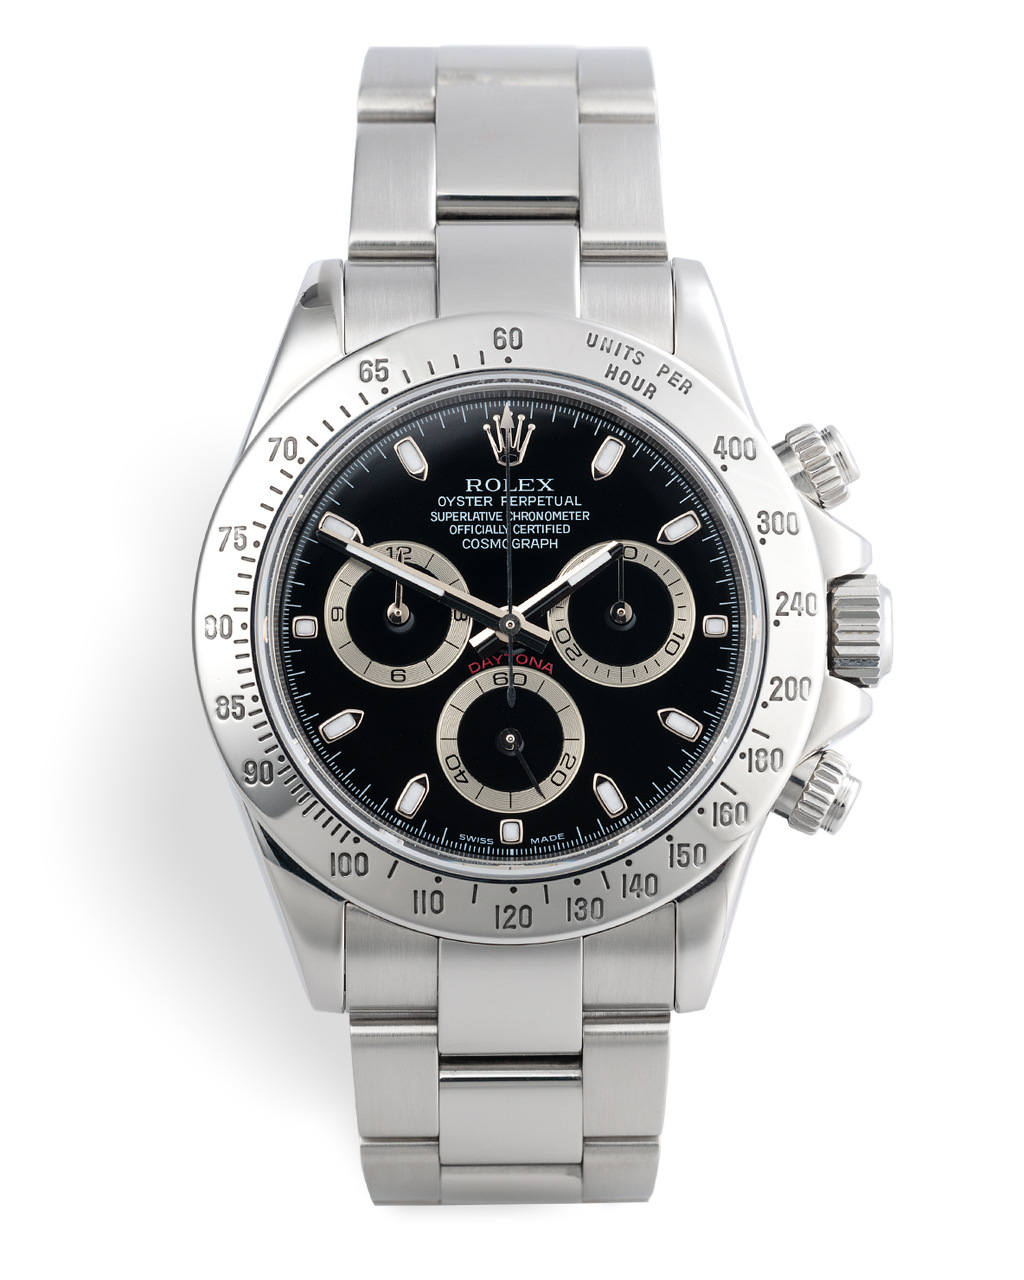 Rolex Cosmograph Daytona Watches | ref 116520 | In-house Calibre 4130 ...